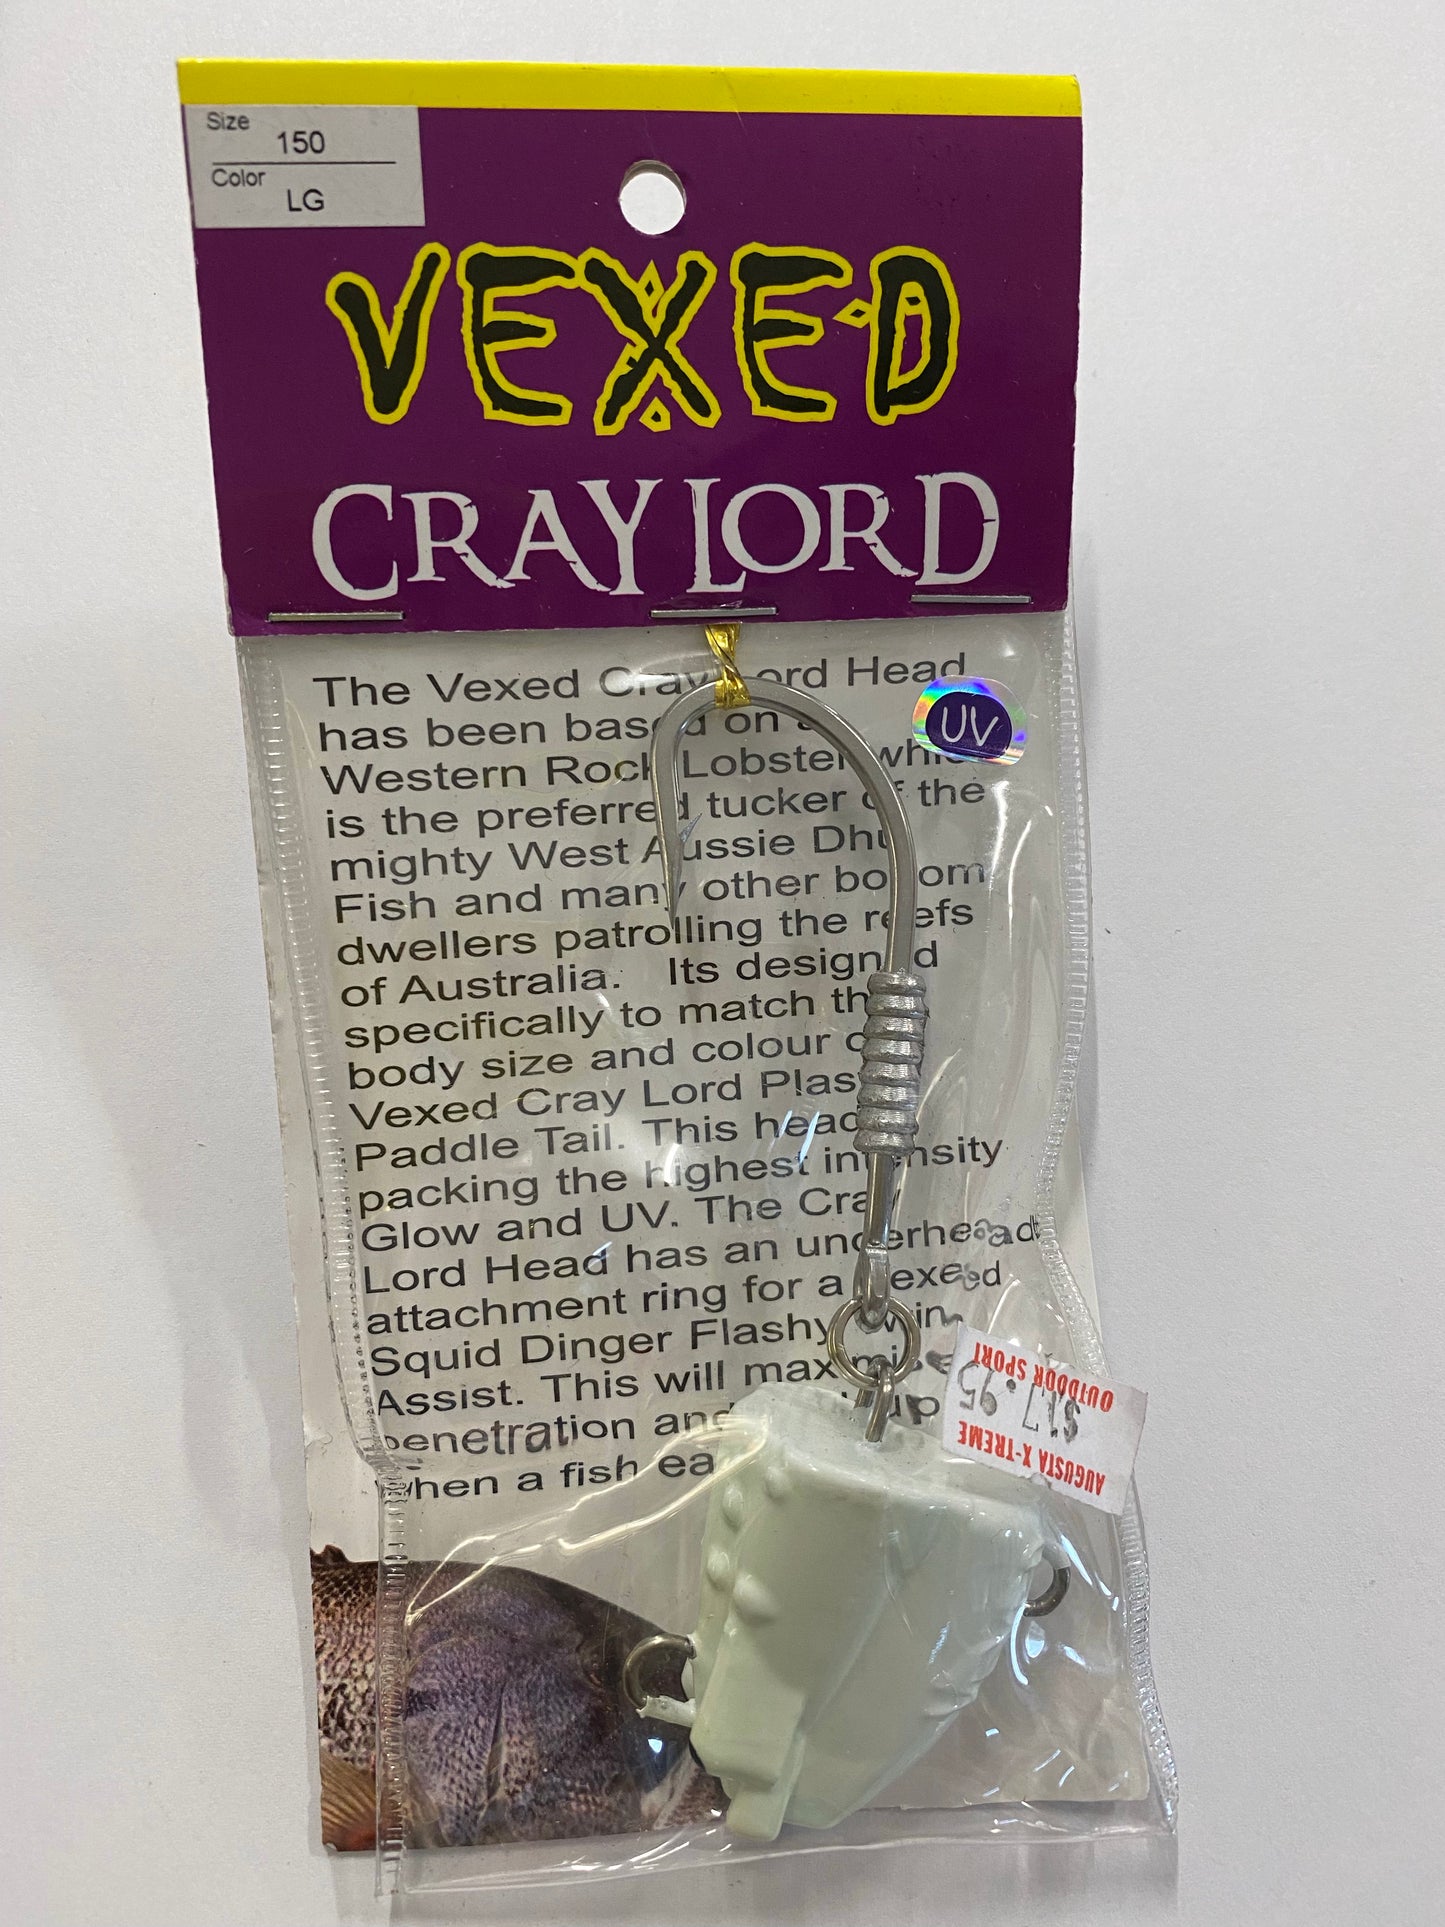 Vexed Cray lord 150g LG